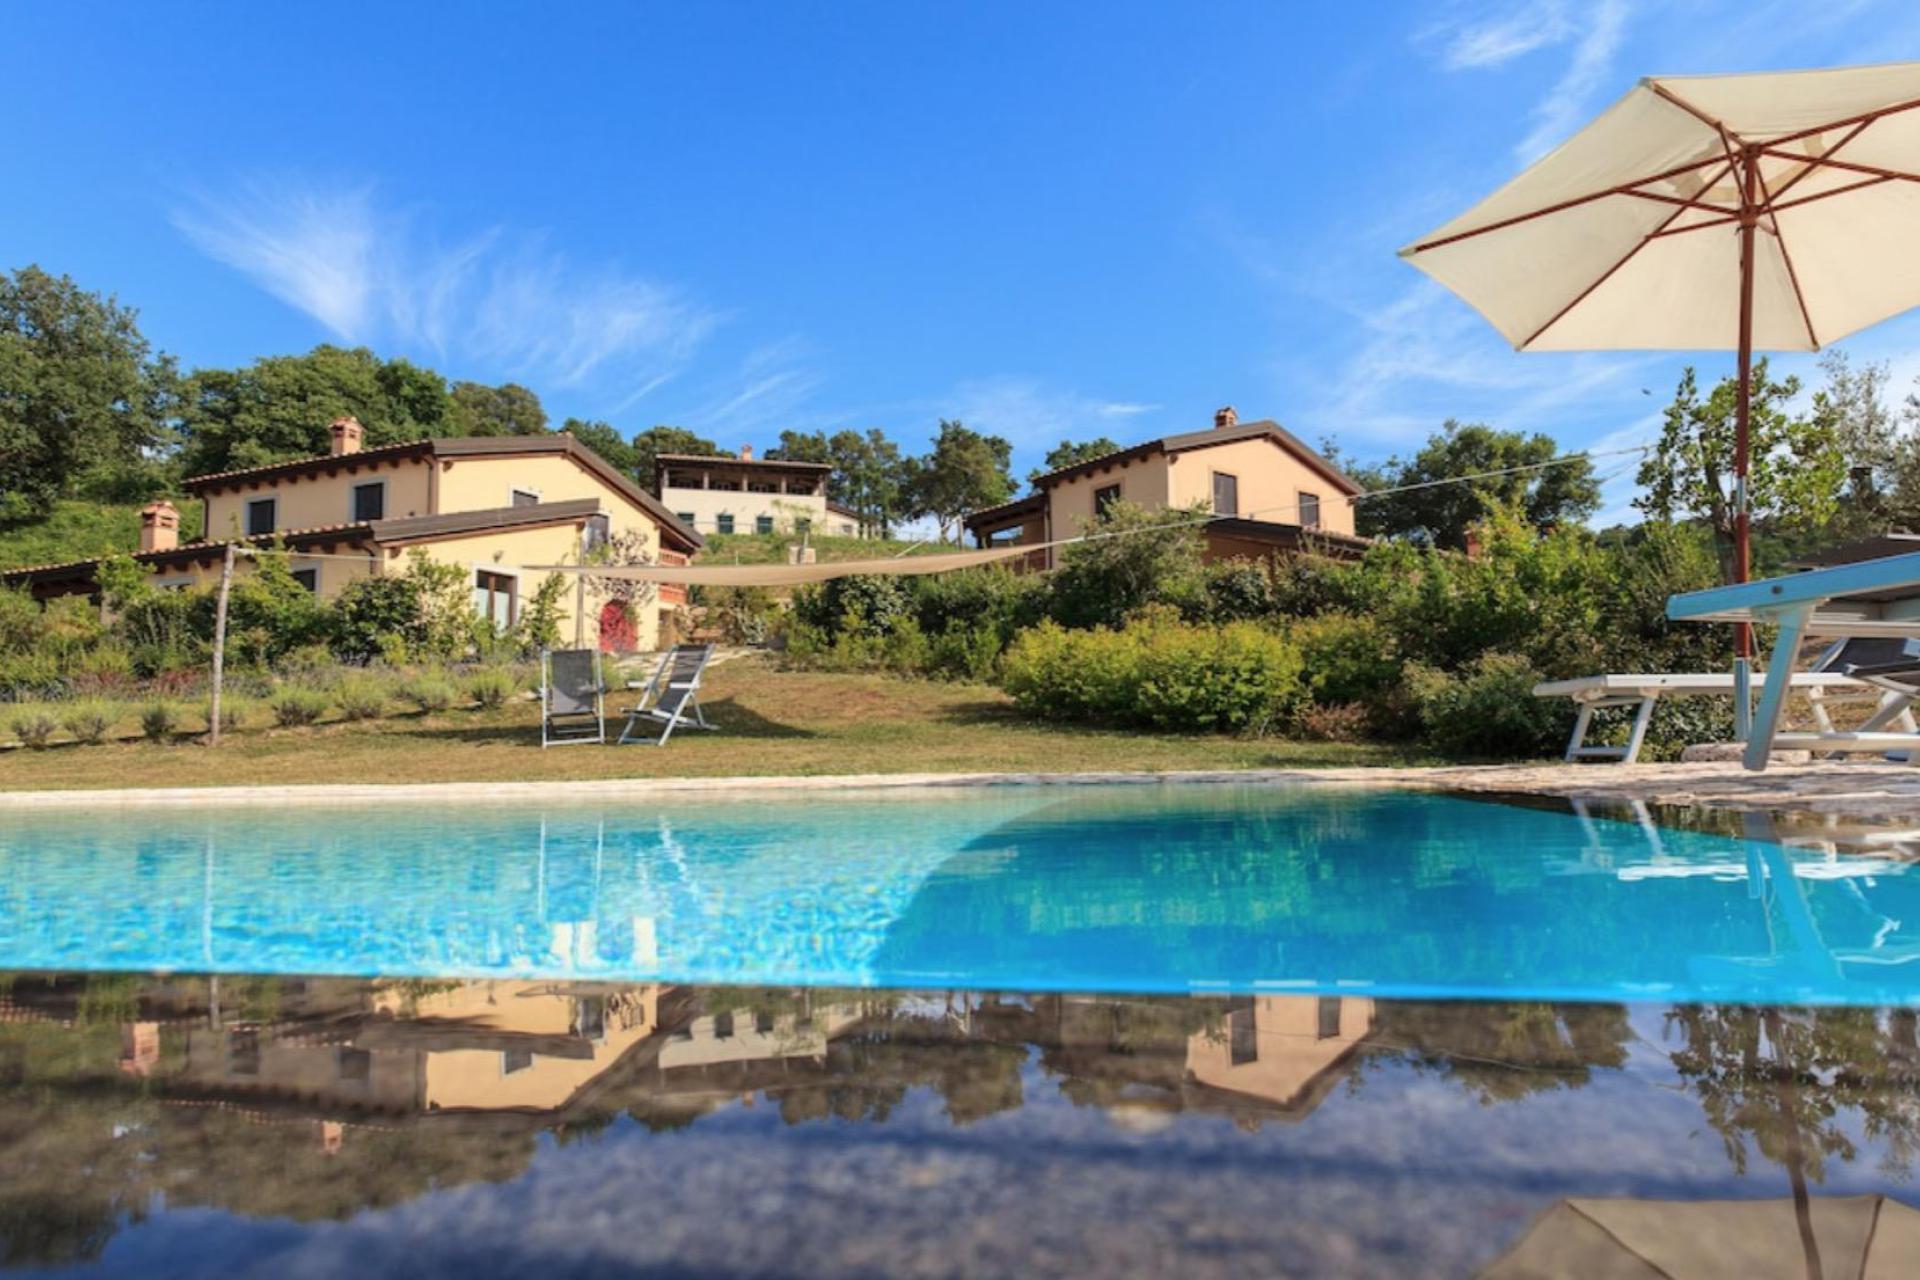 Quietly situated agriturismo in Southern Tuscany